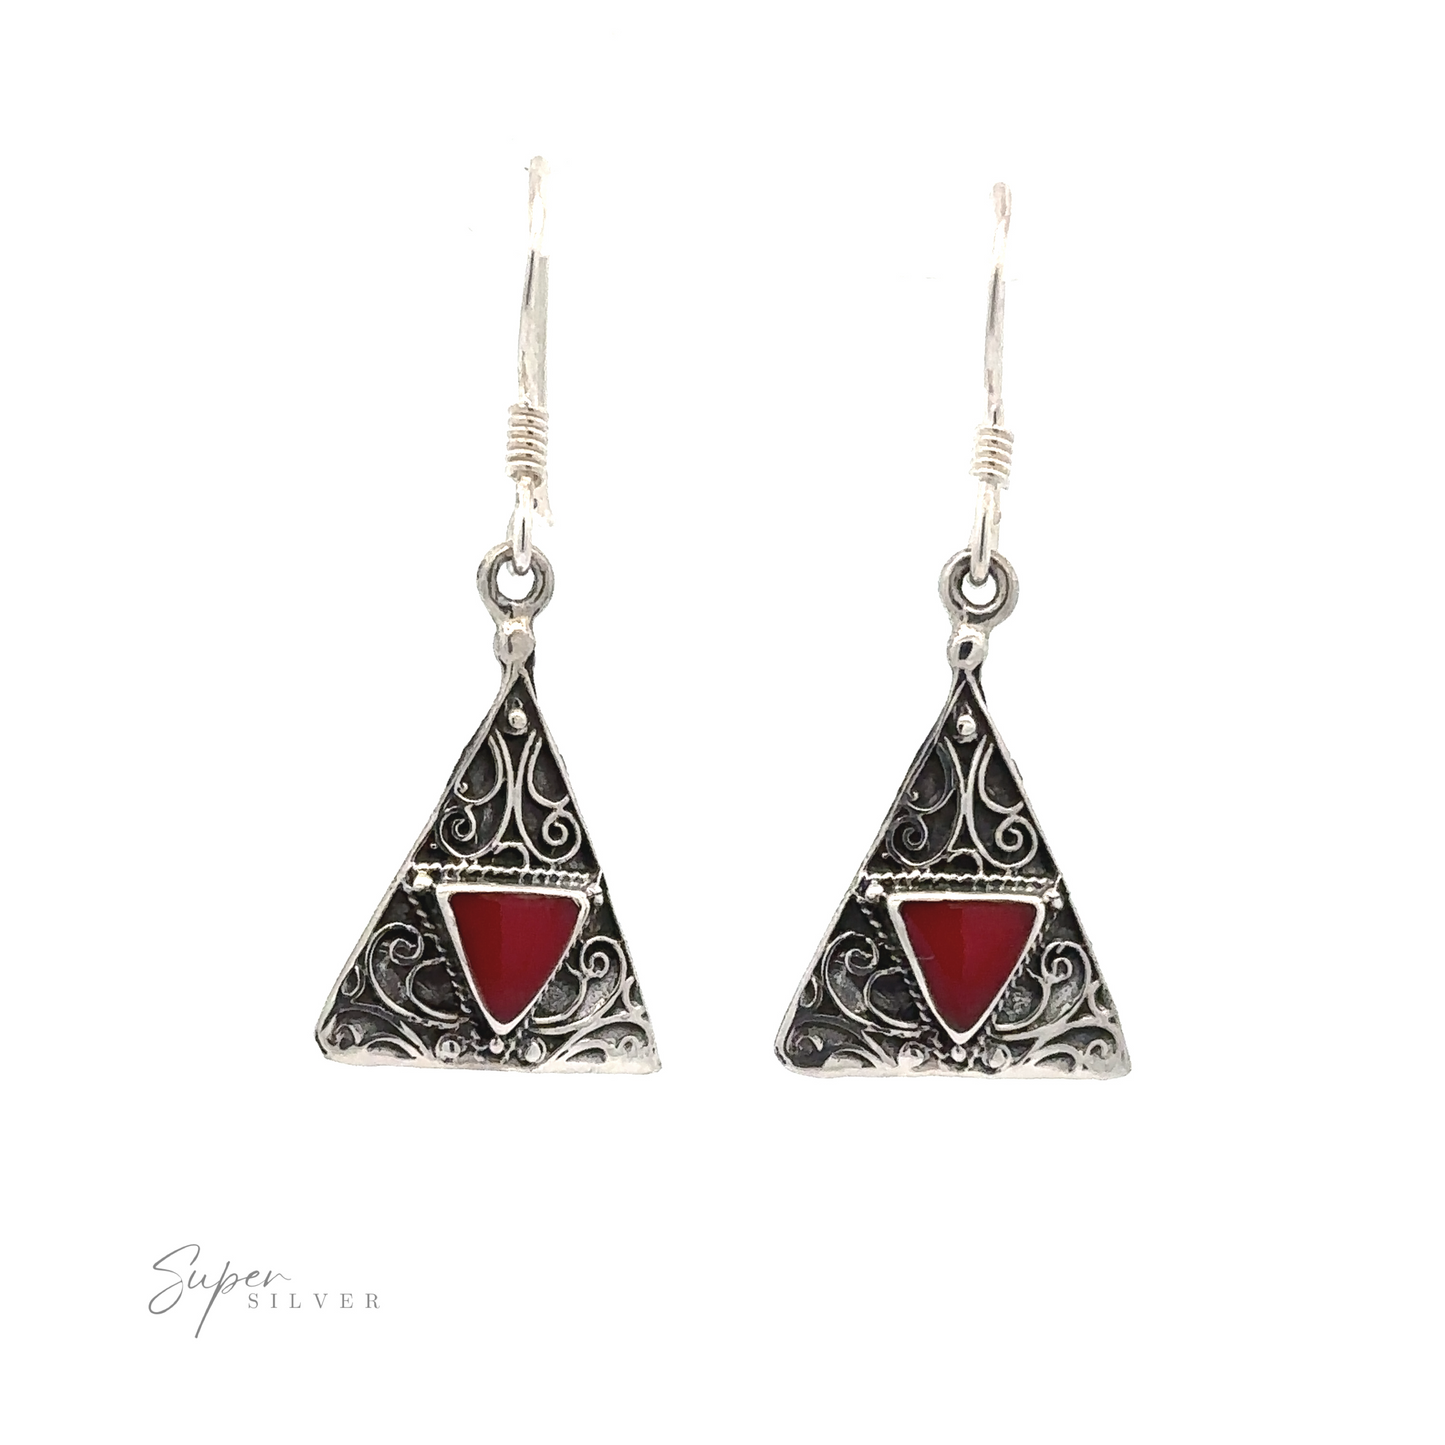 
                  
                    A pair of Freestyle Design Triangle Shape Inlaid Earrings with intricate swirls and red coral stone inlays, set against a white background. The text "Super Silver" is visible in the bottom left corner.
                  
                